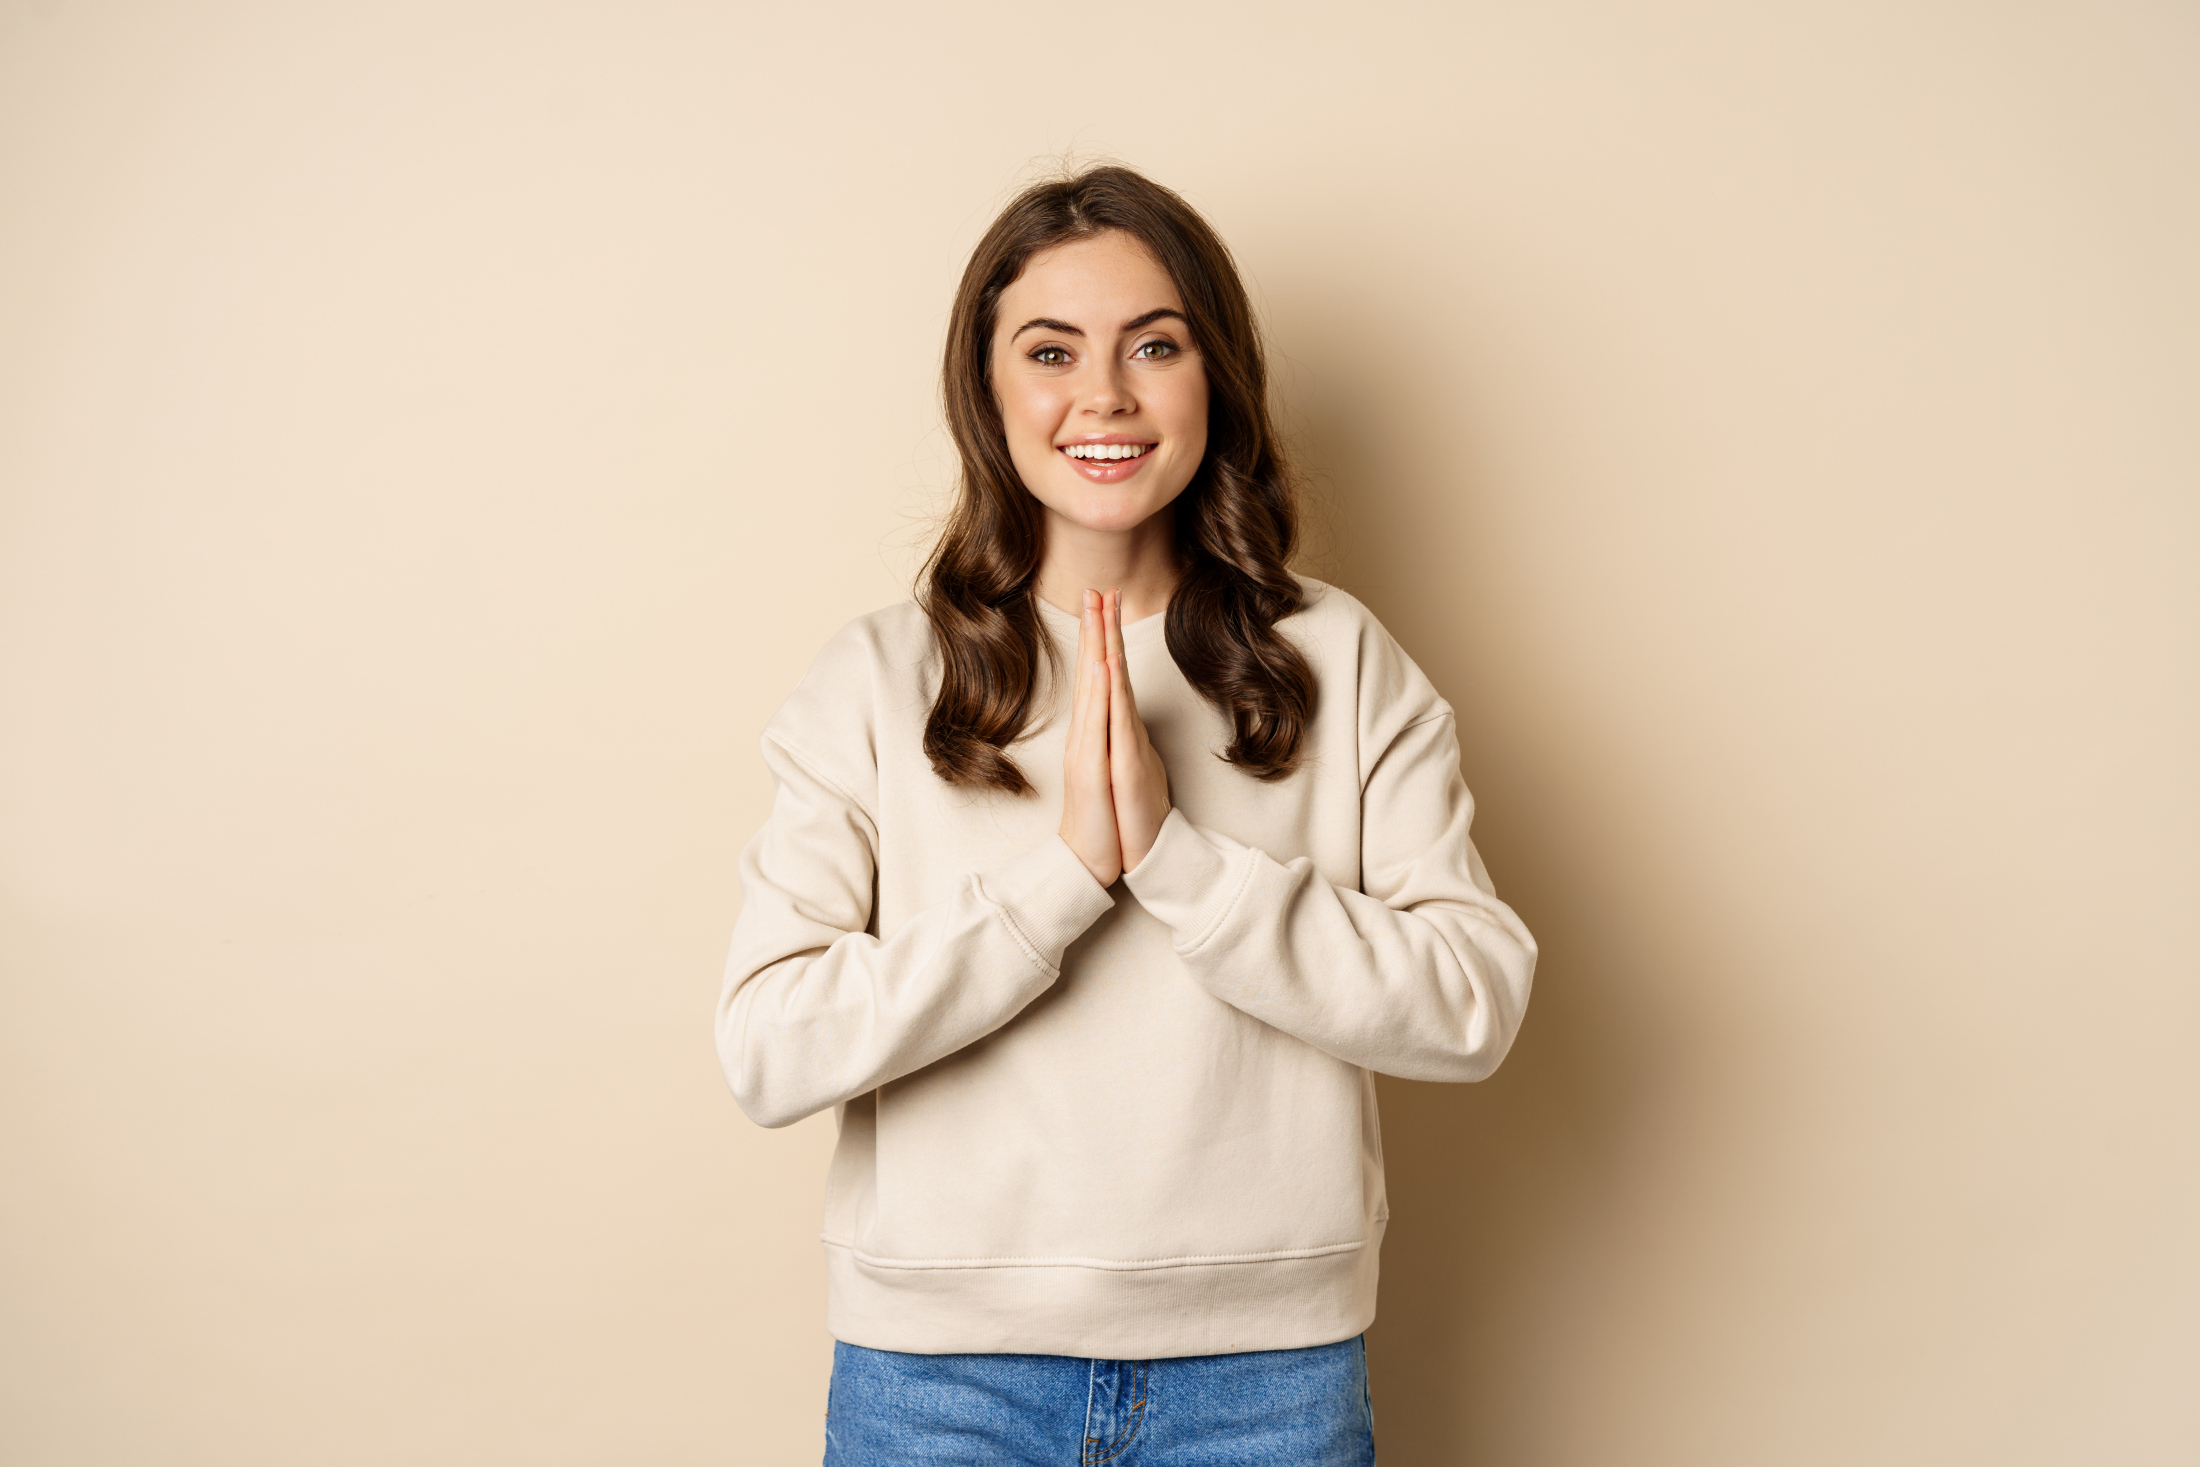 thank-you-smiling-happy-woman-showing-pray-namaste-gesture-thanking-standing-pleased-and-grateful-over-beige-background.jpg